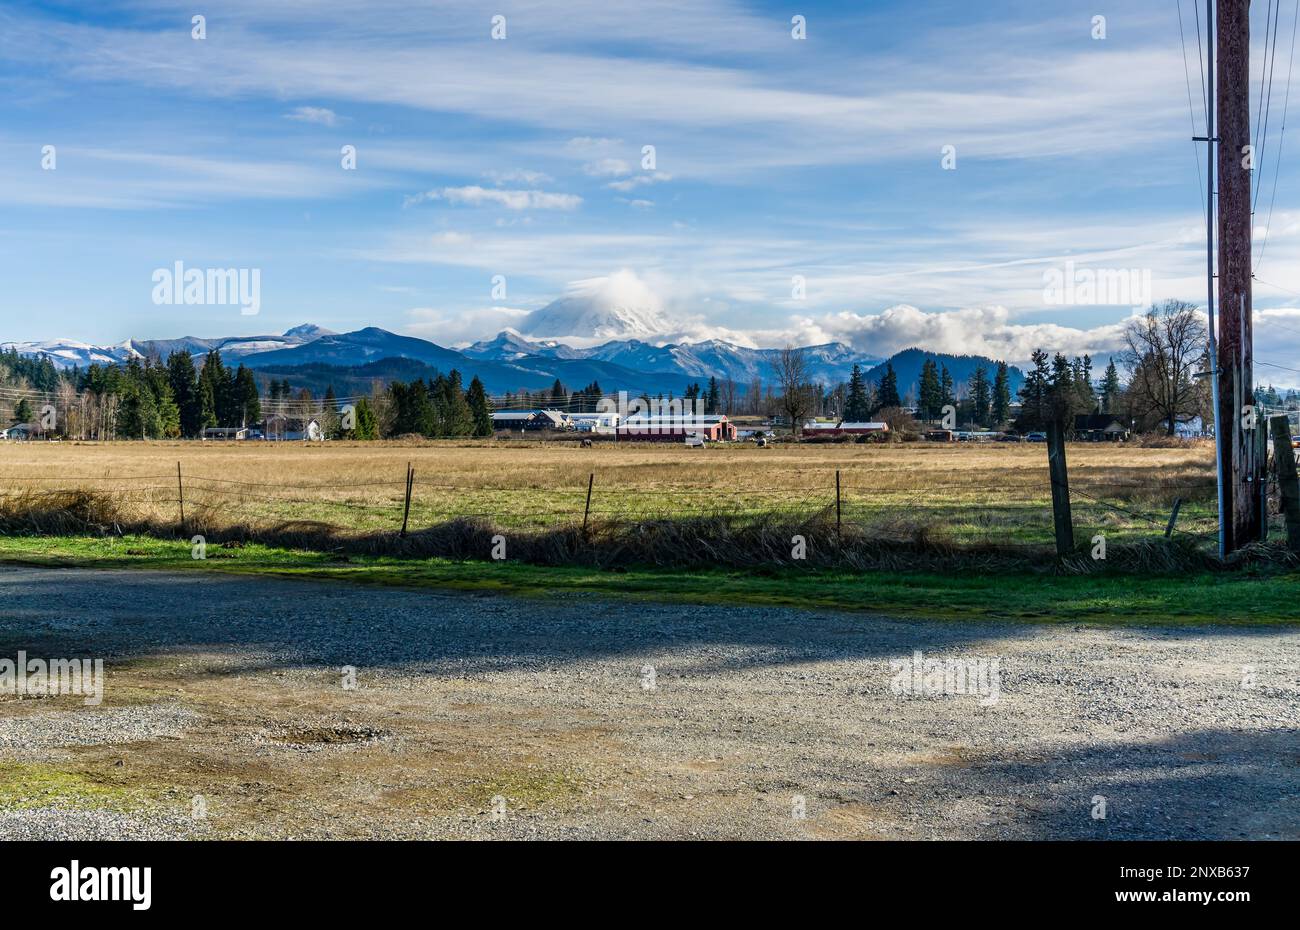 A view of the countryside and Mount Rainier in Enumclaw, Washington. Stock Photo